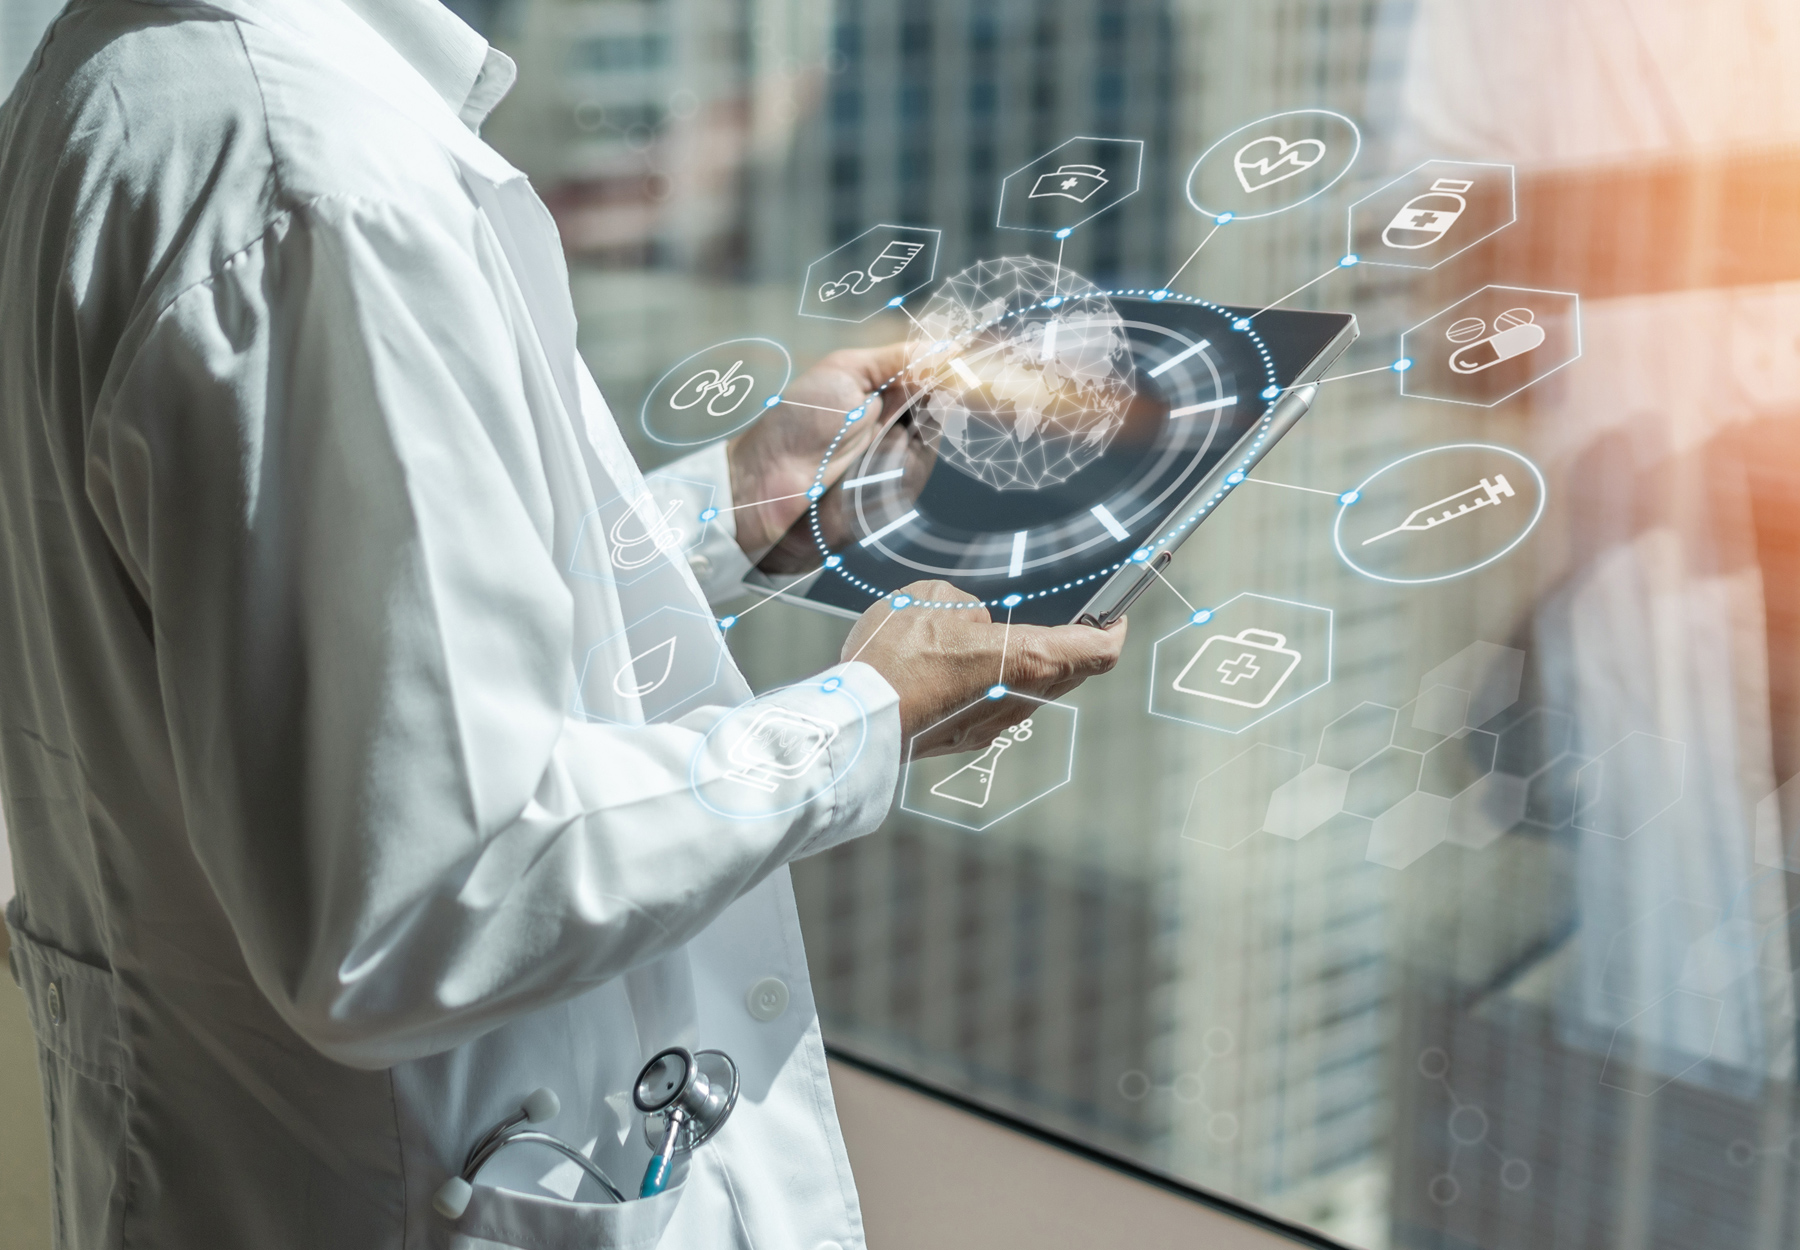 Closeup of doctor holding tablet with numerous medical icons. The doctor is at a window with a cityscape outside of it. Healthcare industry concept. iStock image.